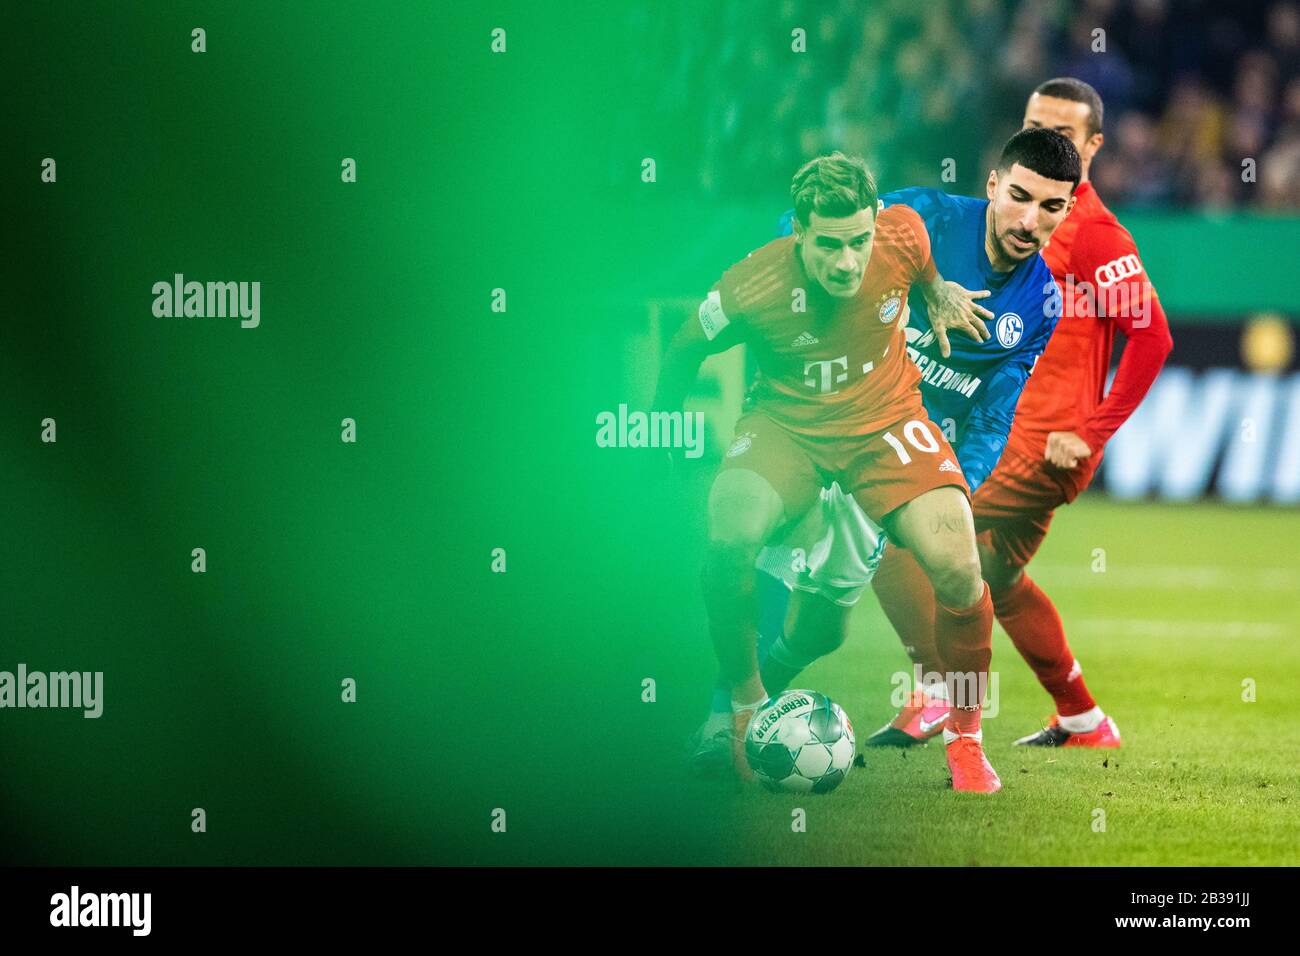 Gelsenkirchen, Germany, Veltins-Arena, 3.03.2020: Philippe Coutinho of Muenchen (in front) against Nassim Boujellab of Schalke 04 during the cup match Stock Photo